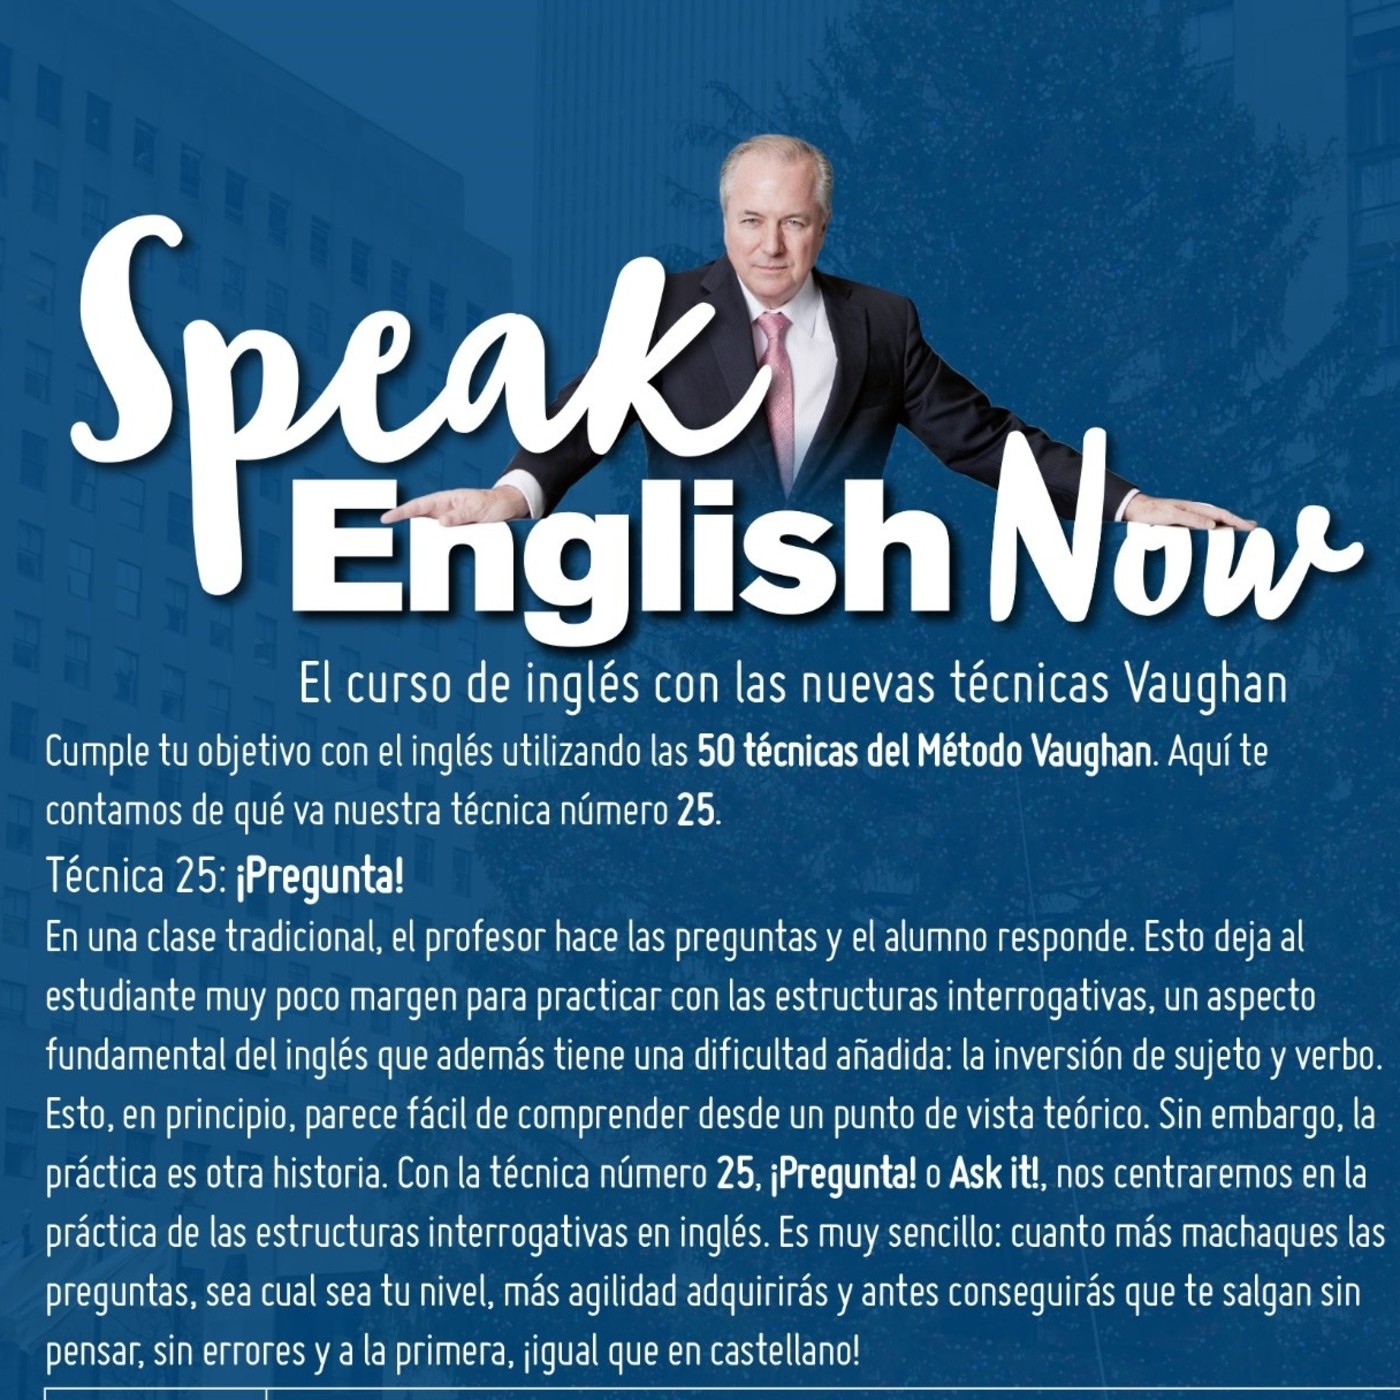 Speak English Now by Vaughan Libro 7